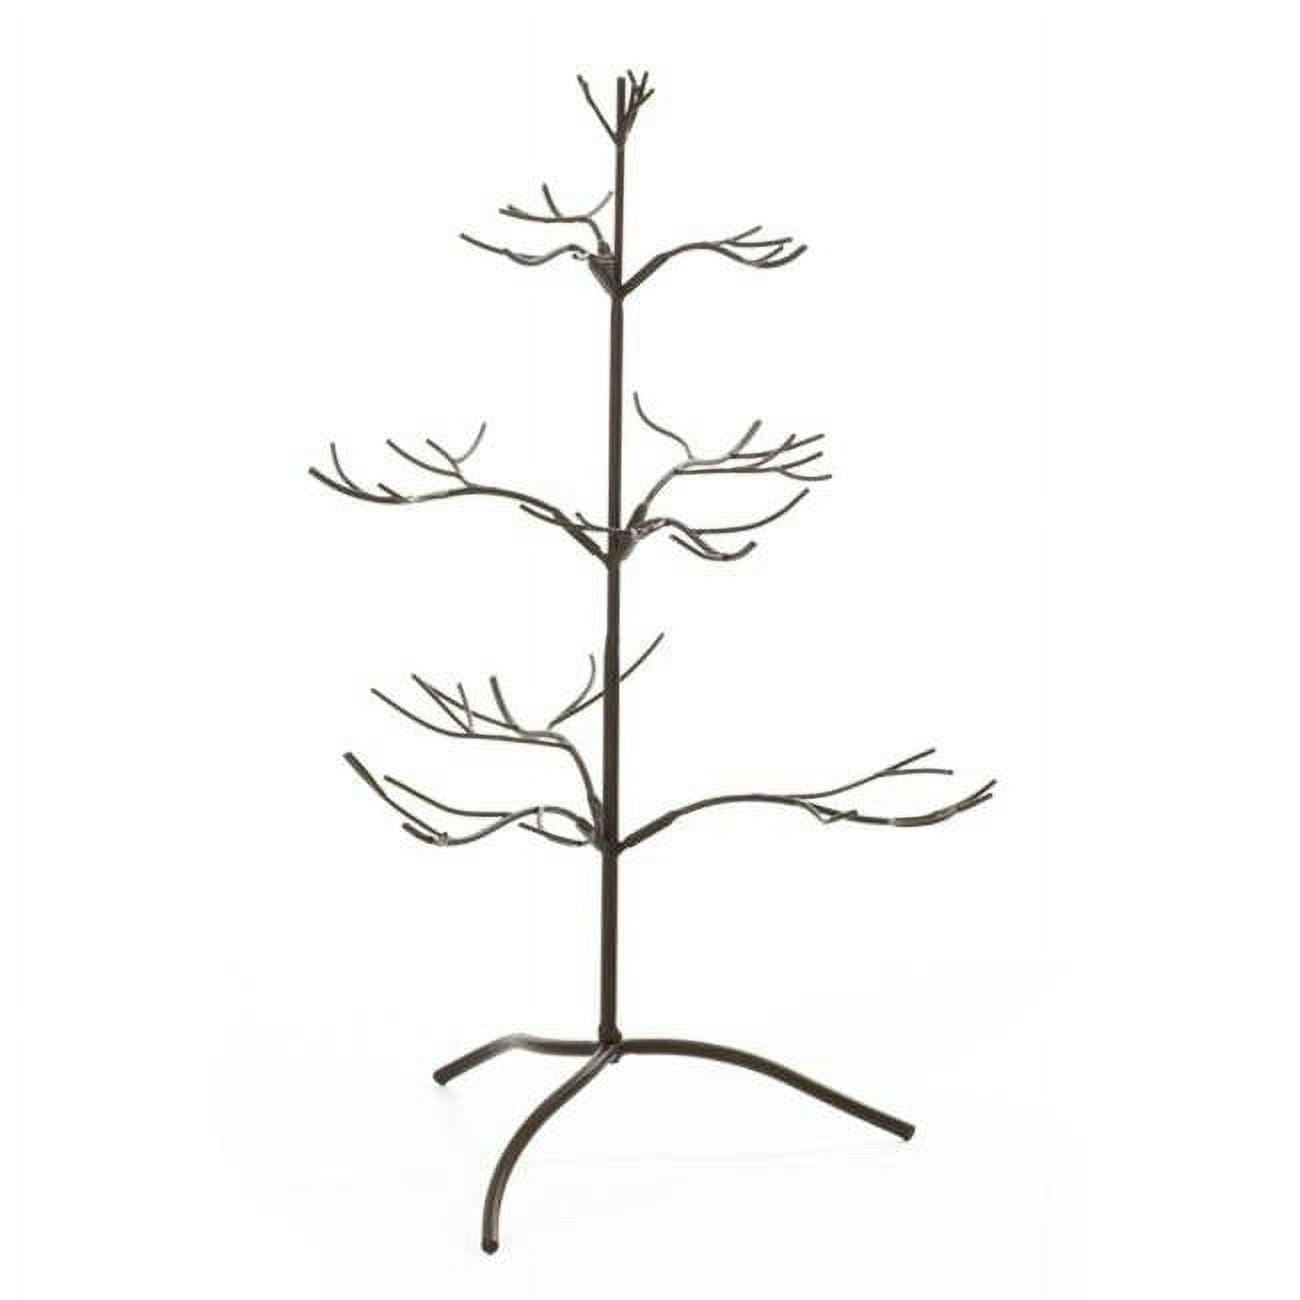 Elegant 25" Metal Display Tree with 5-Tier Branches in Brown